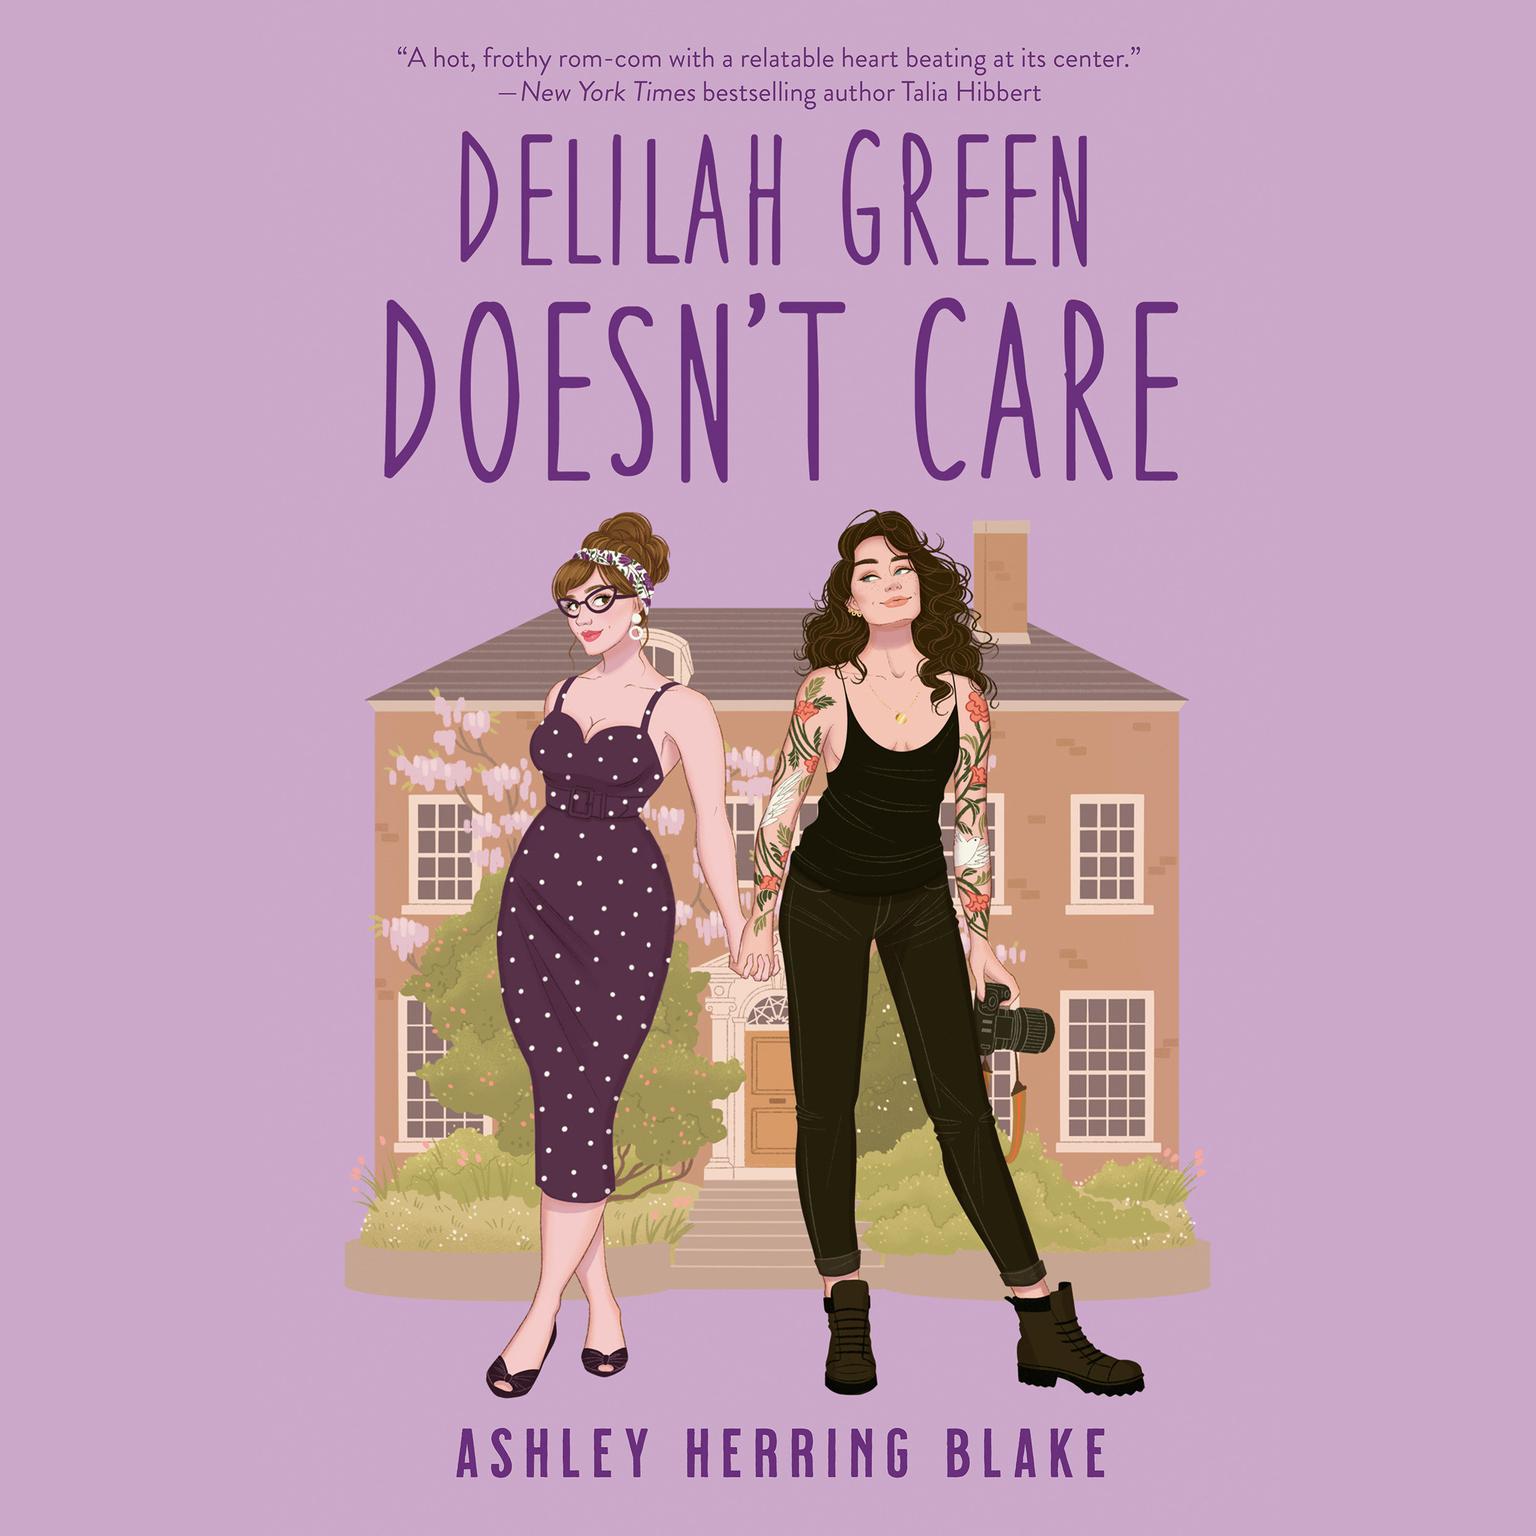 Ashley Herring Blake: Delilah Green Doesn't Care (2022, Little, Brown Book Group Limited)